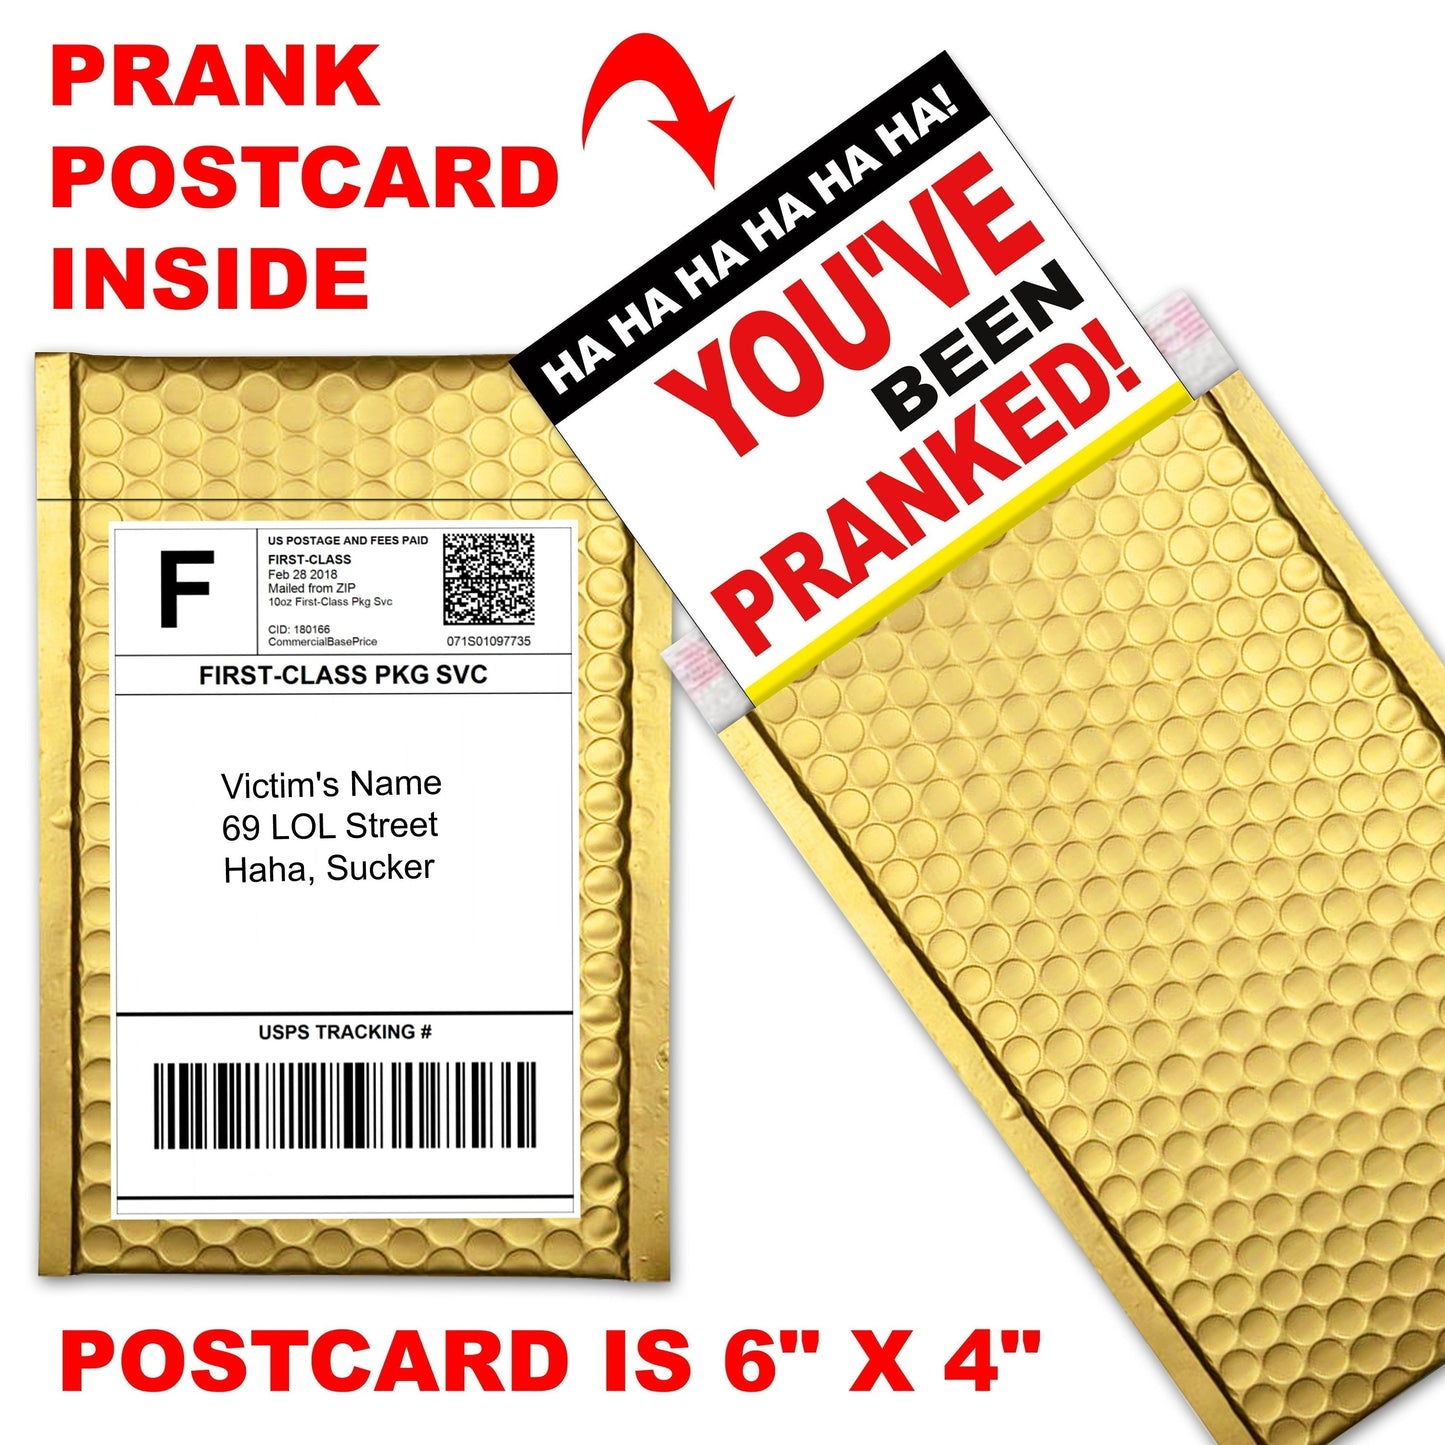 Your Prostate Exam is Coming embarrassing prank envelope gets mailed directly to your victims 100% anonymously!